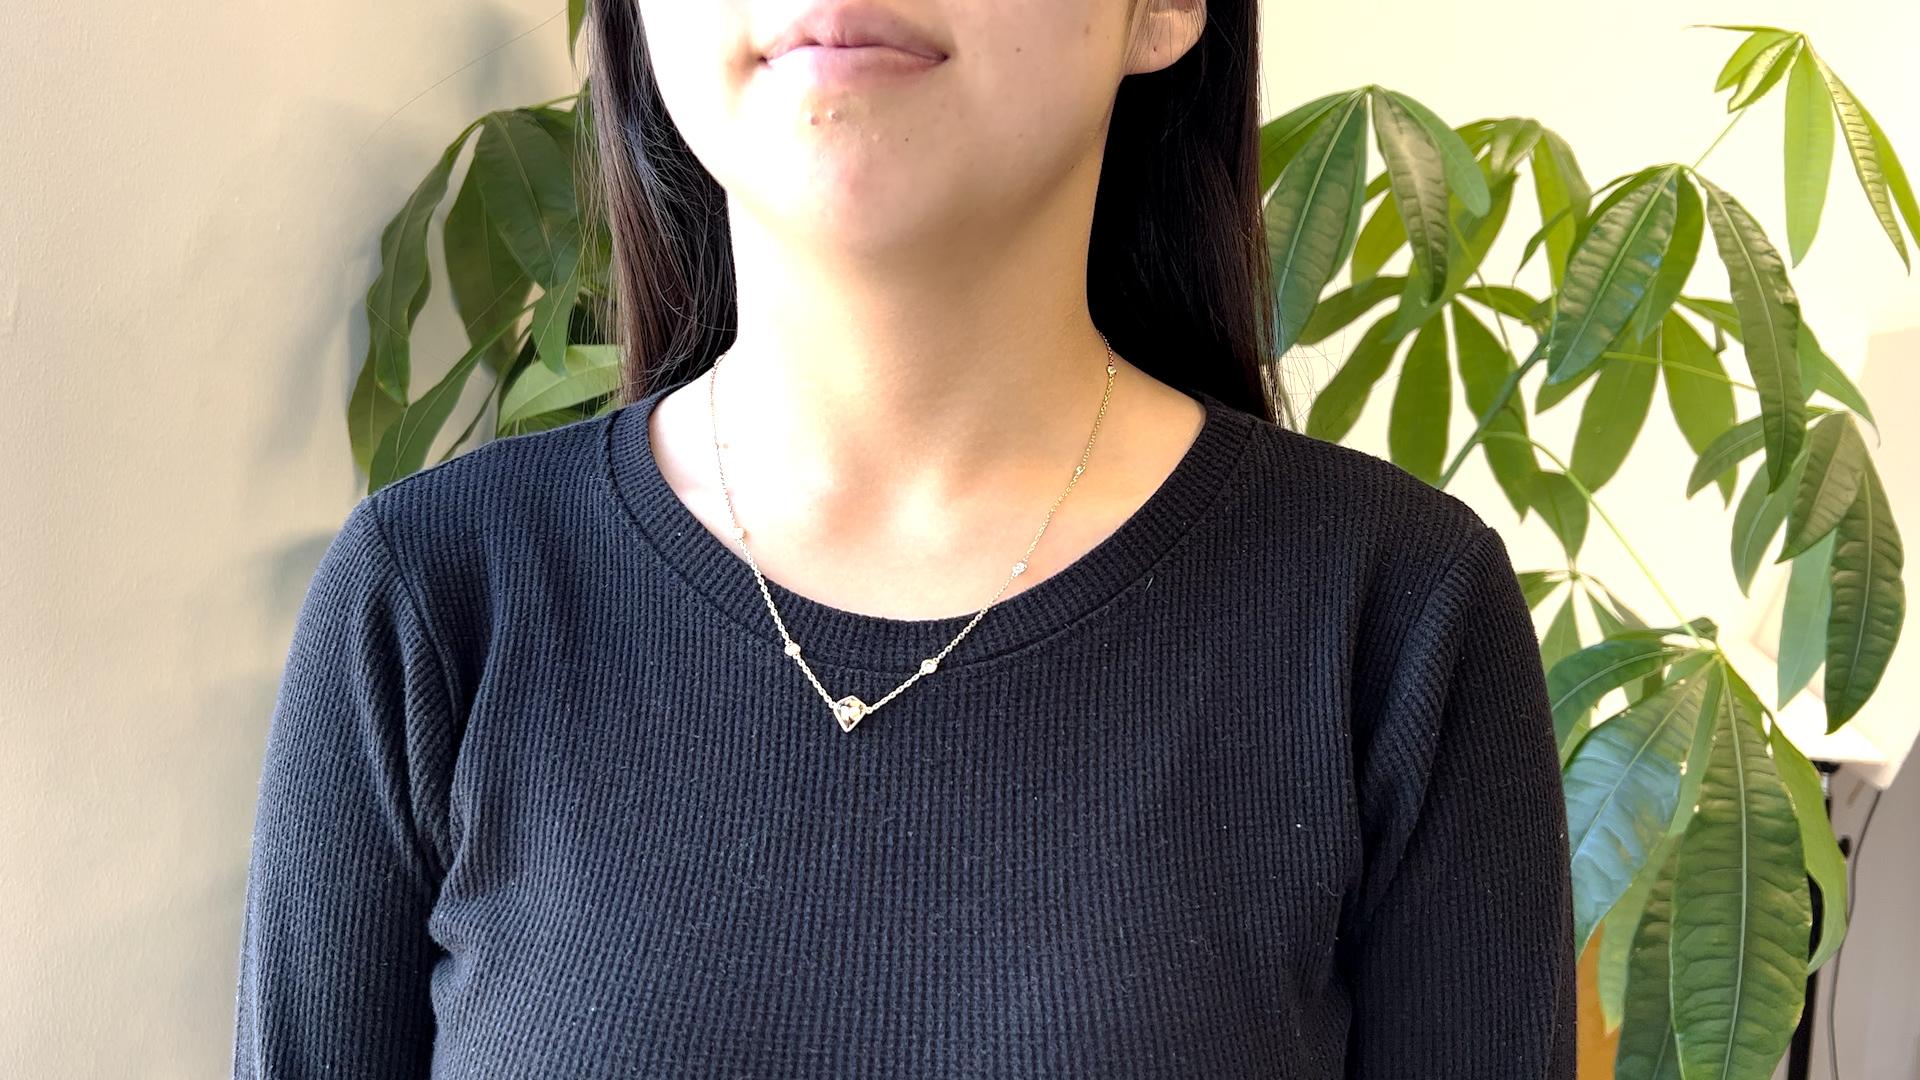 One Fancy Color Diamond 14k Yellow Gold Diamonds By the Yard Chain Necklace. Featuring one GIA kite cut diamond of 1.59 carats, accompanied with GIA #2221837300 stating the diamond is fancy dark brown, VS2 clarity. Accented by ten round brilliant